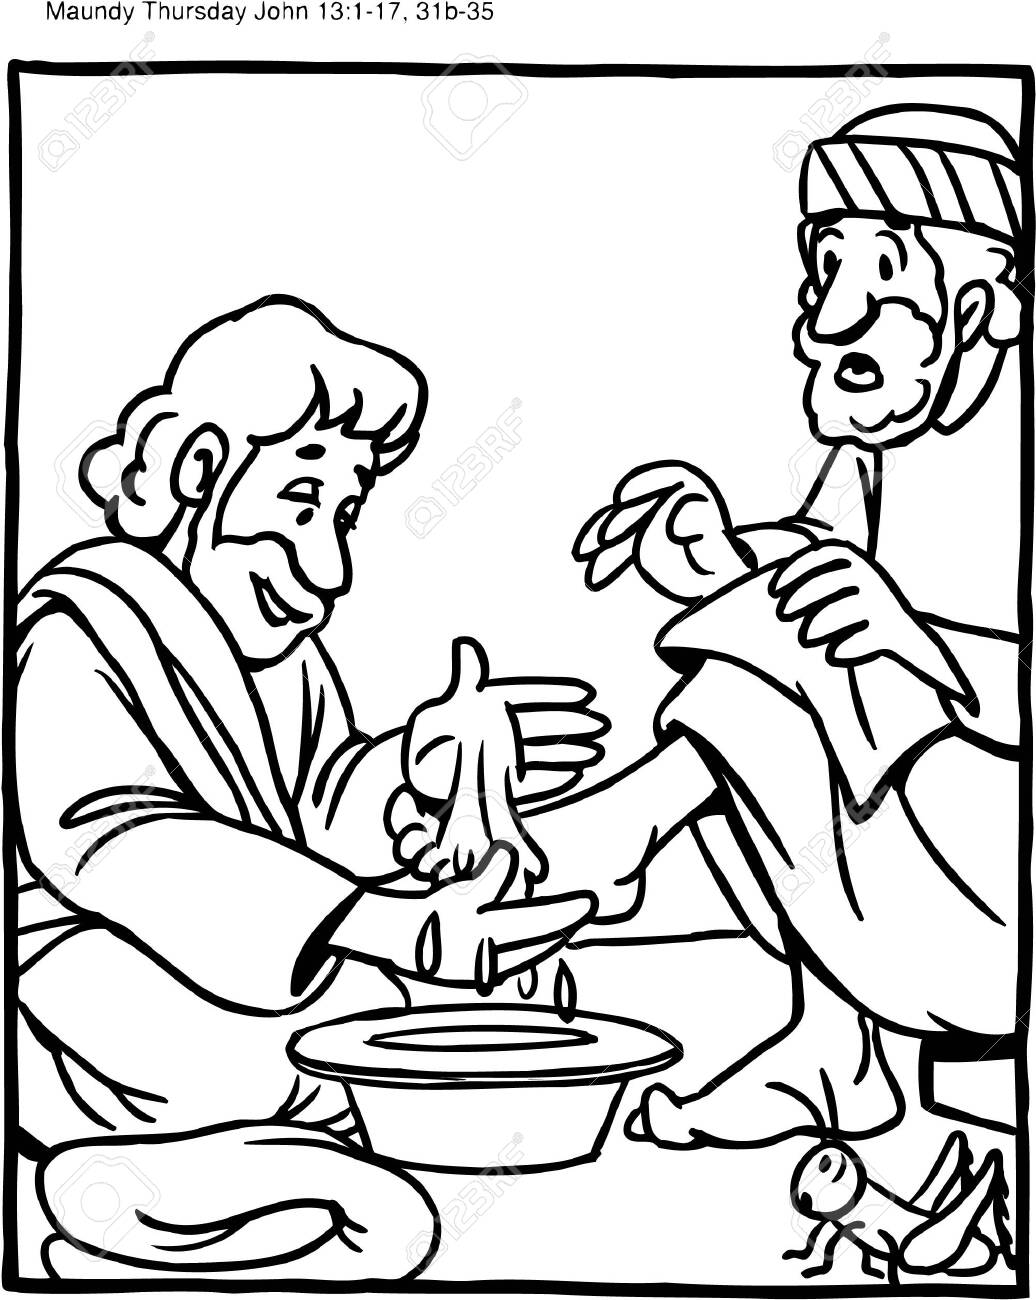 Coloring page jesus washes feet of disciples royalty free svg cliparts vectors and stock illustration image